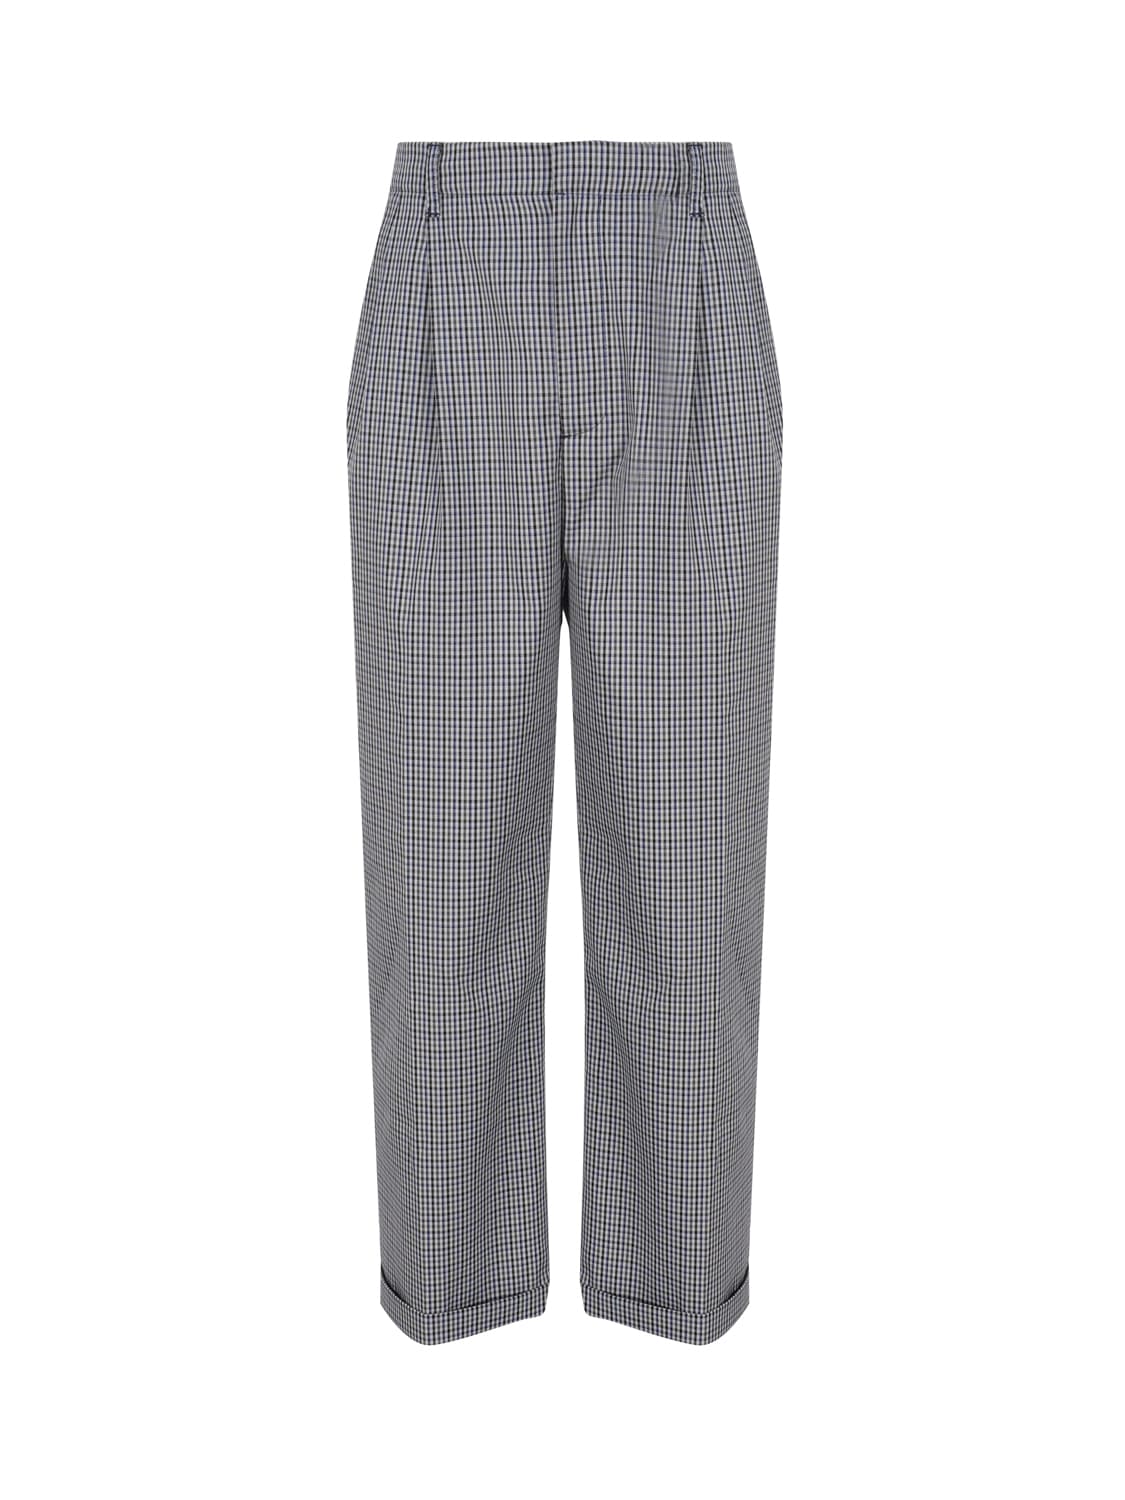 Marni Neptune Checked Compact Wool Trousers